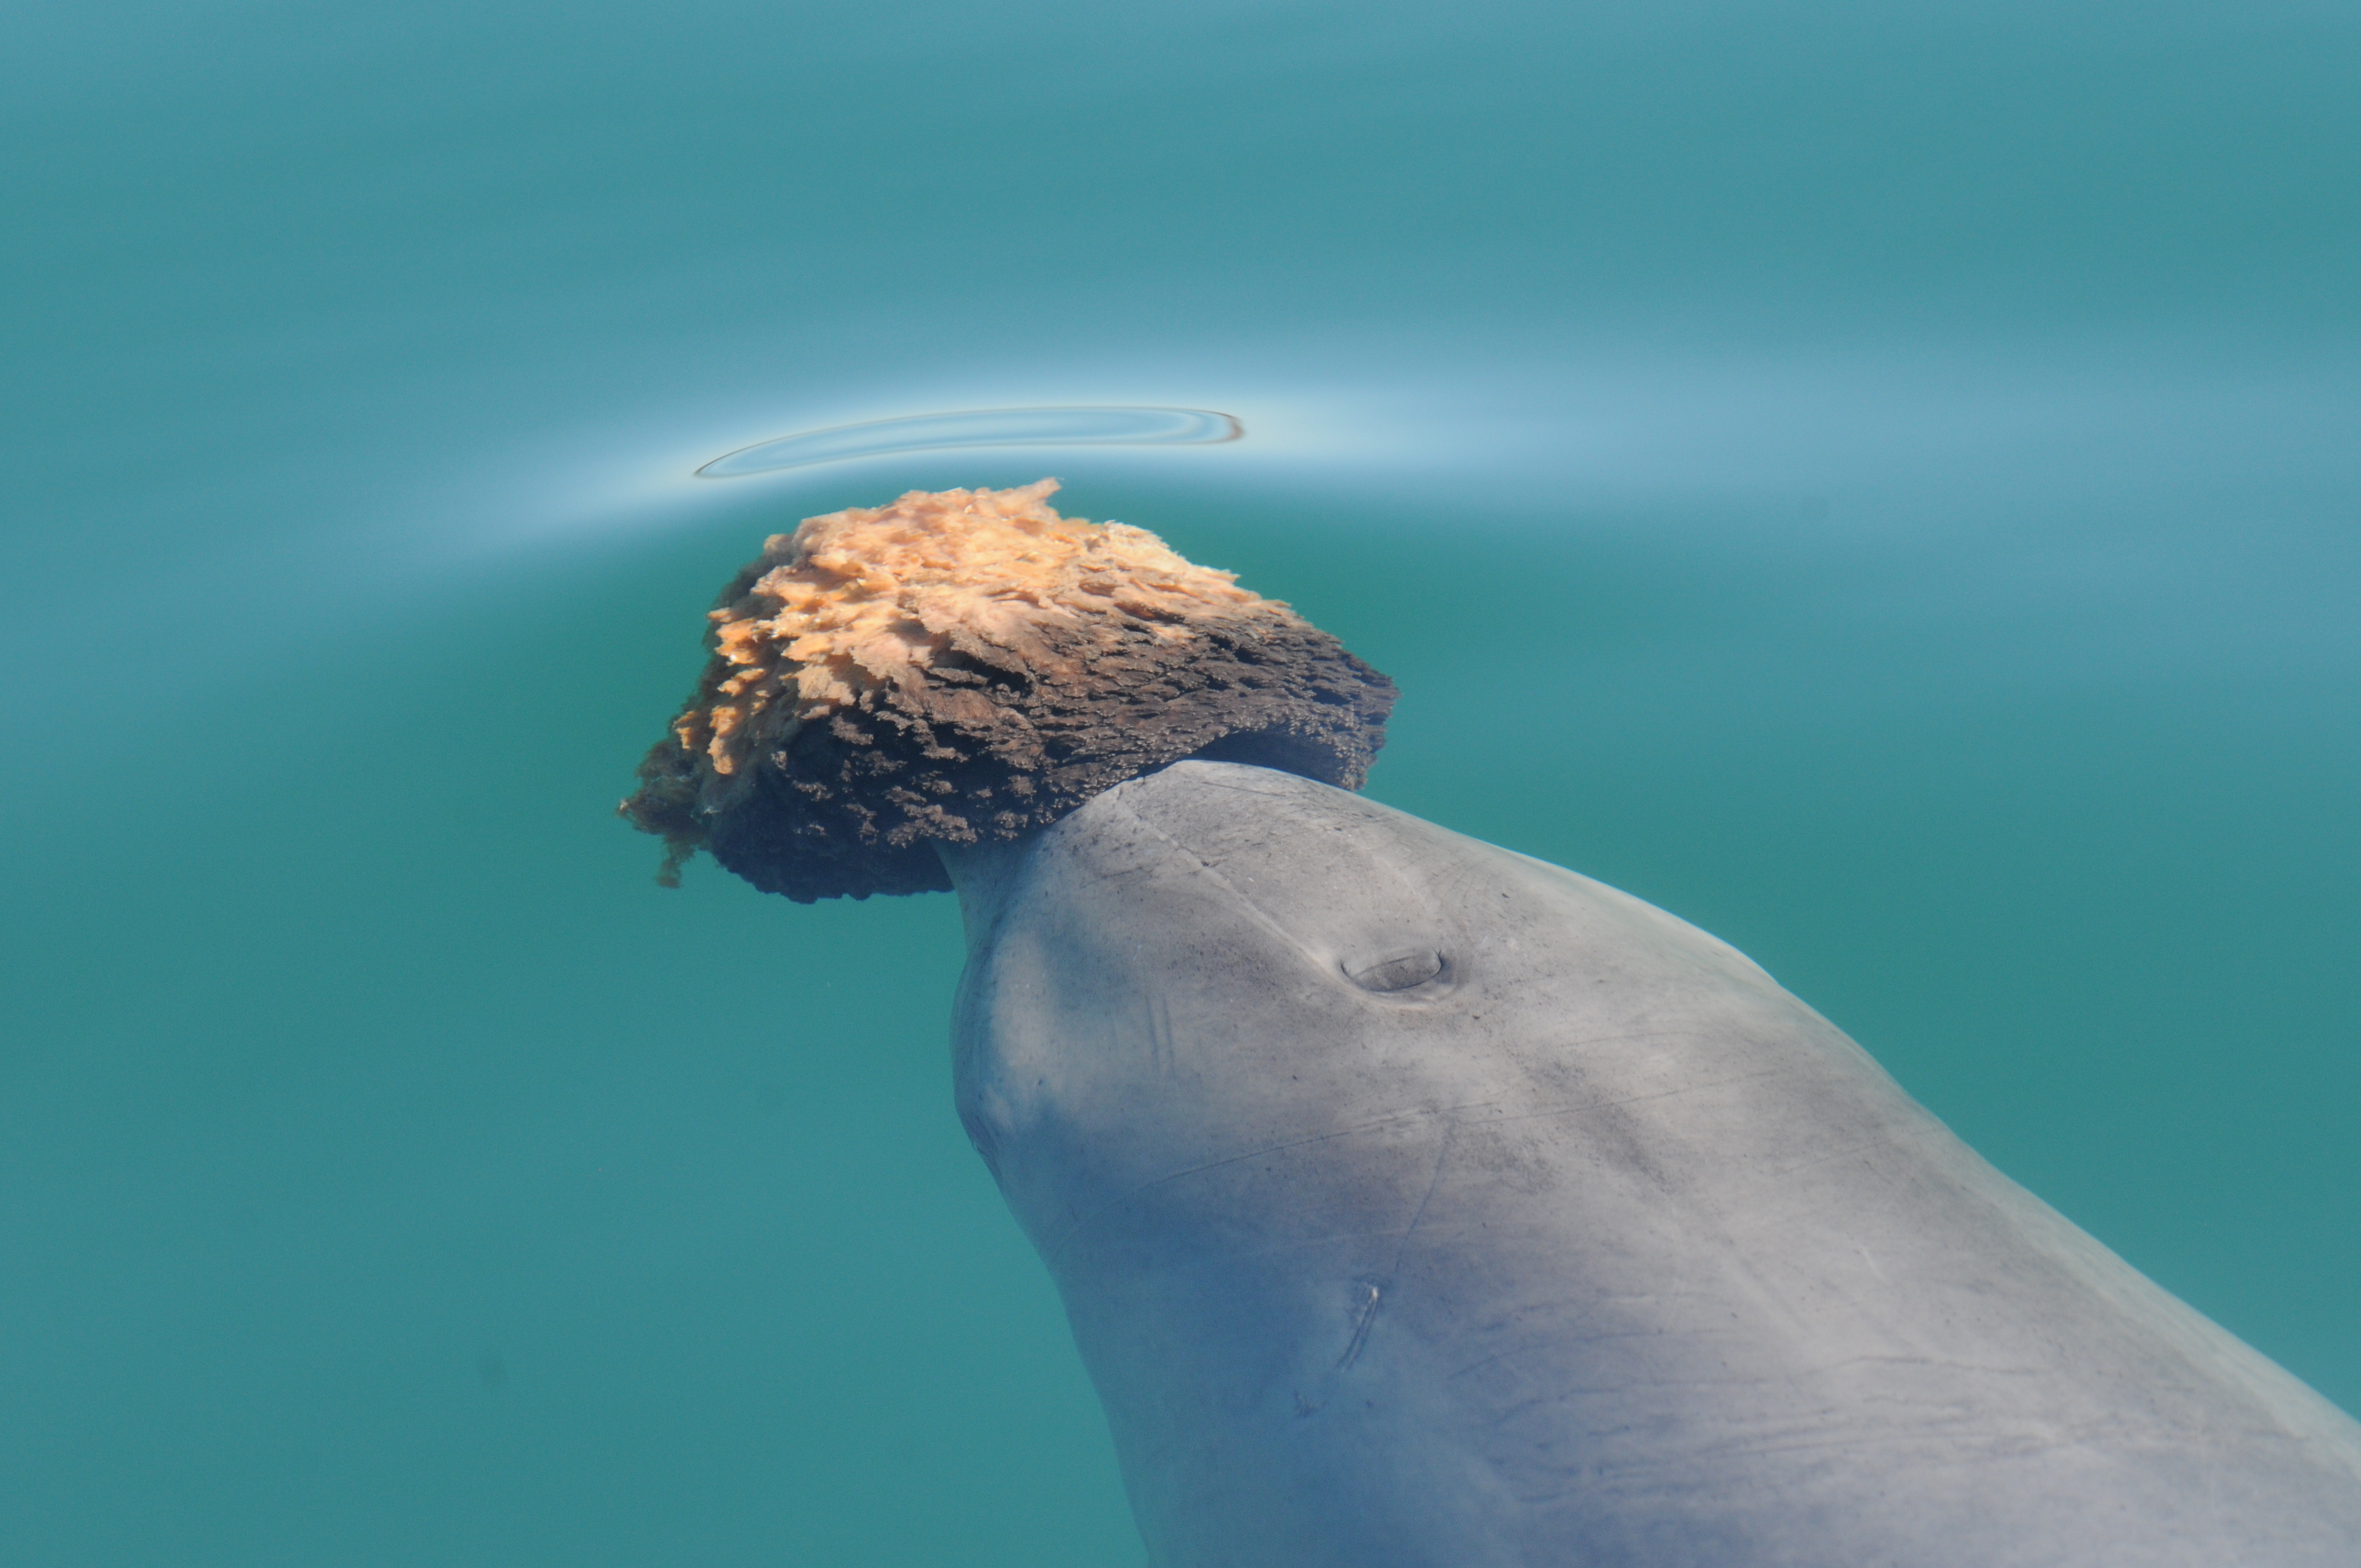 Some dolphins in Shark Bay use sponges as tools to protect their snouts while probing the bottom for prey.